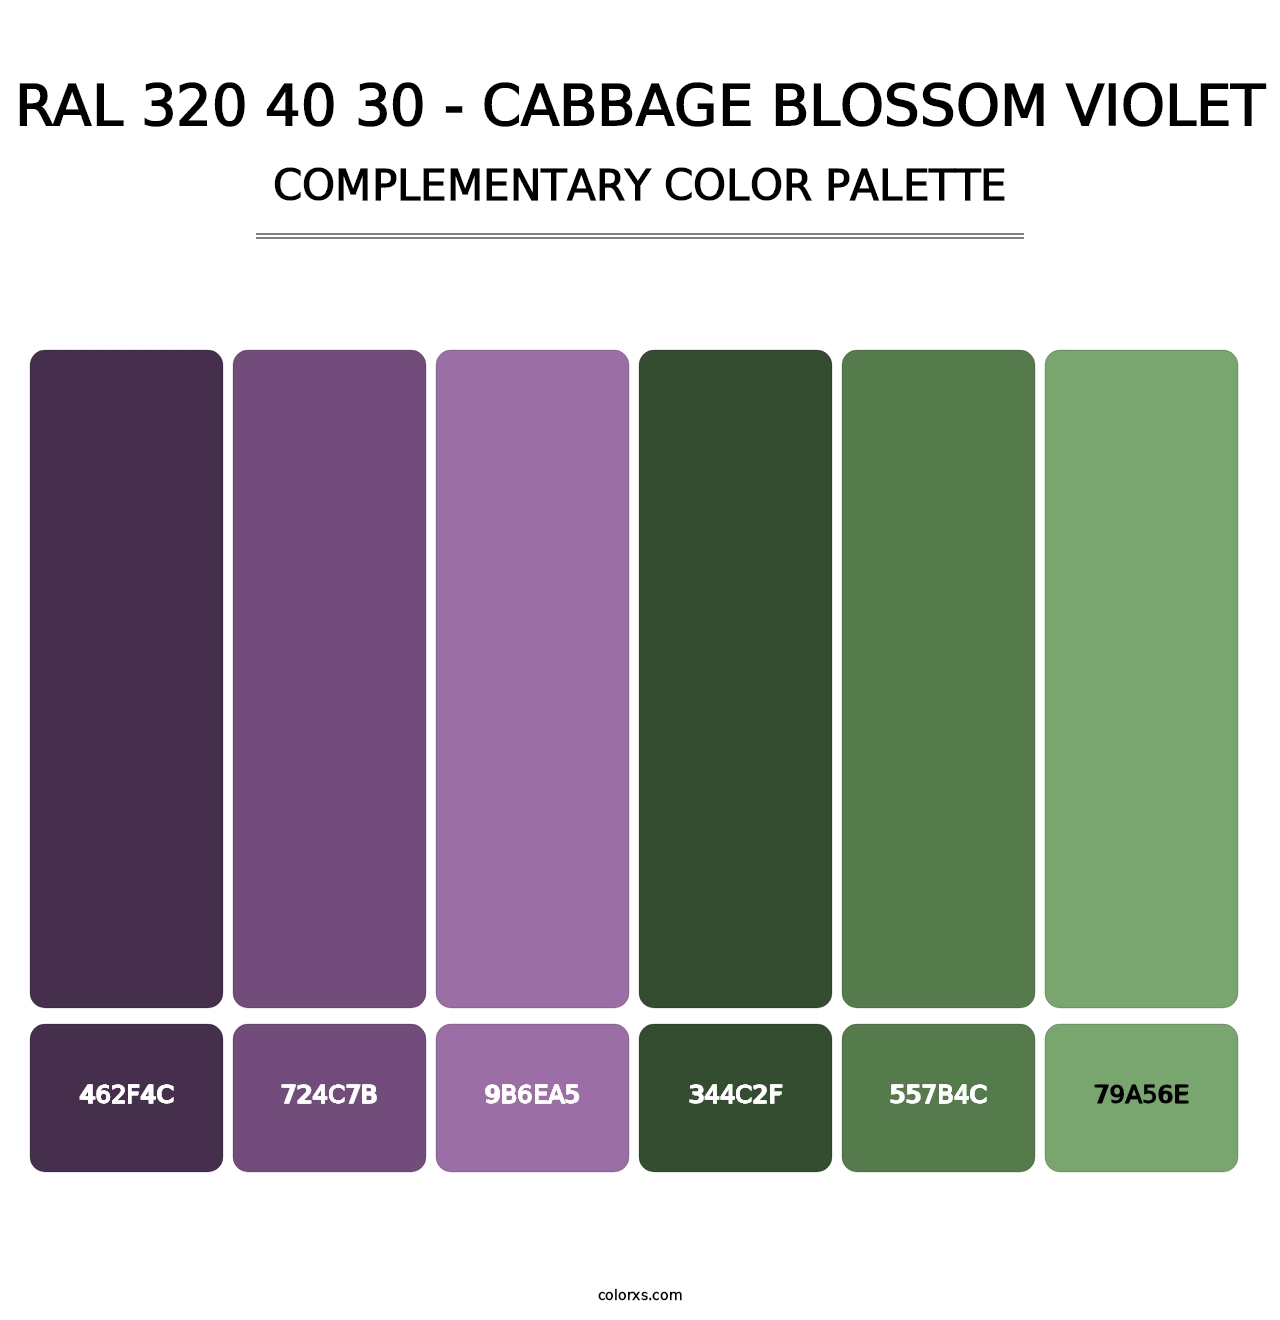 RAL 320 40 30 - Cabbage Blossom Violet - Complementary Color Palette